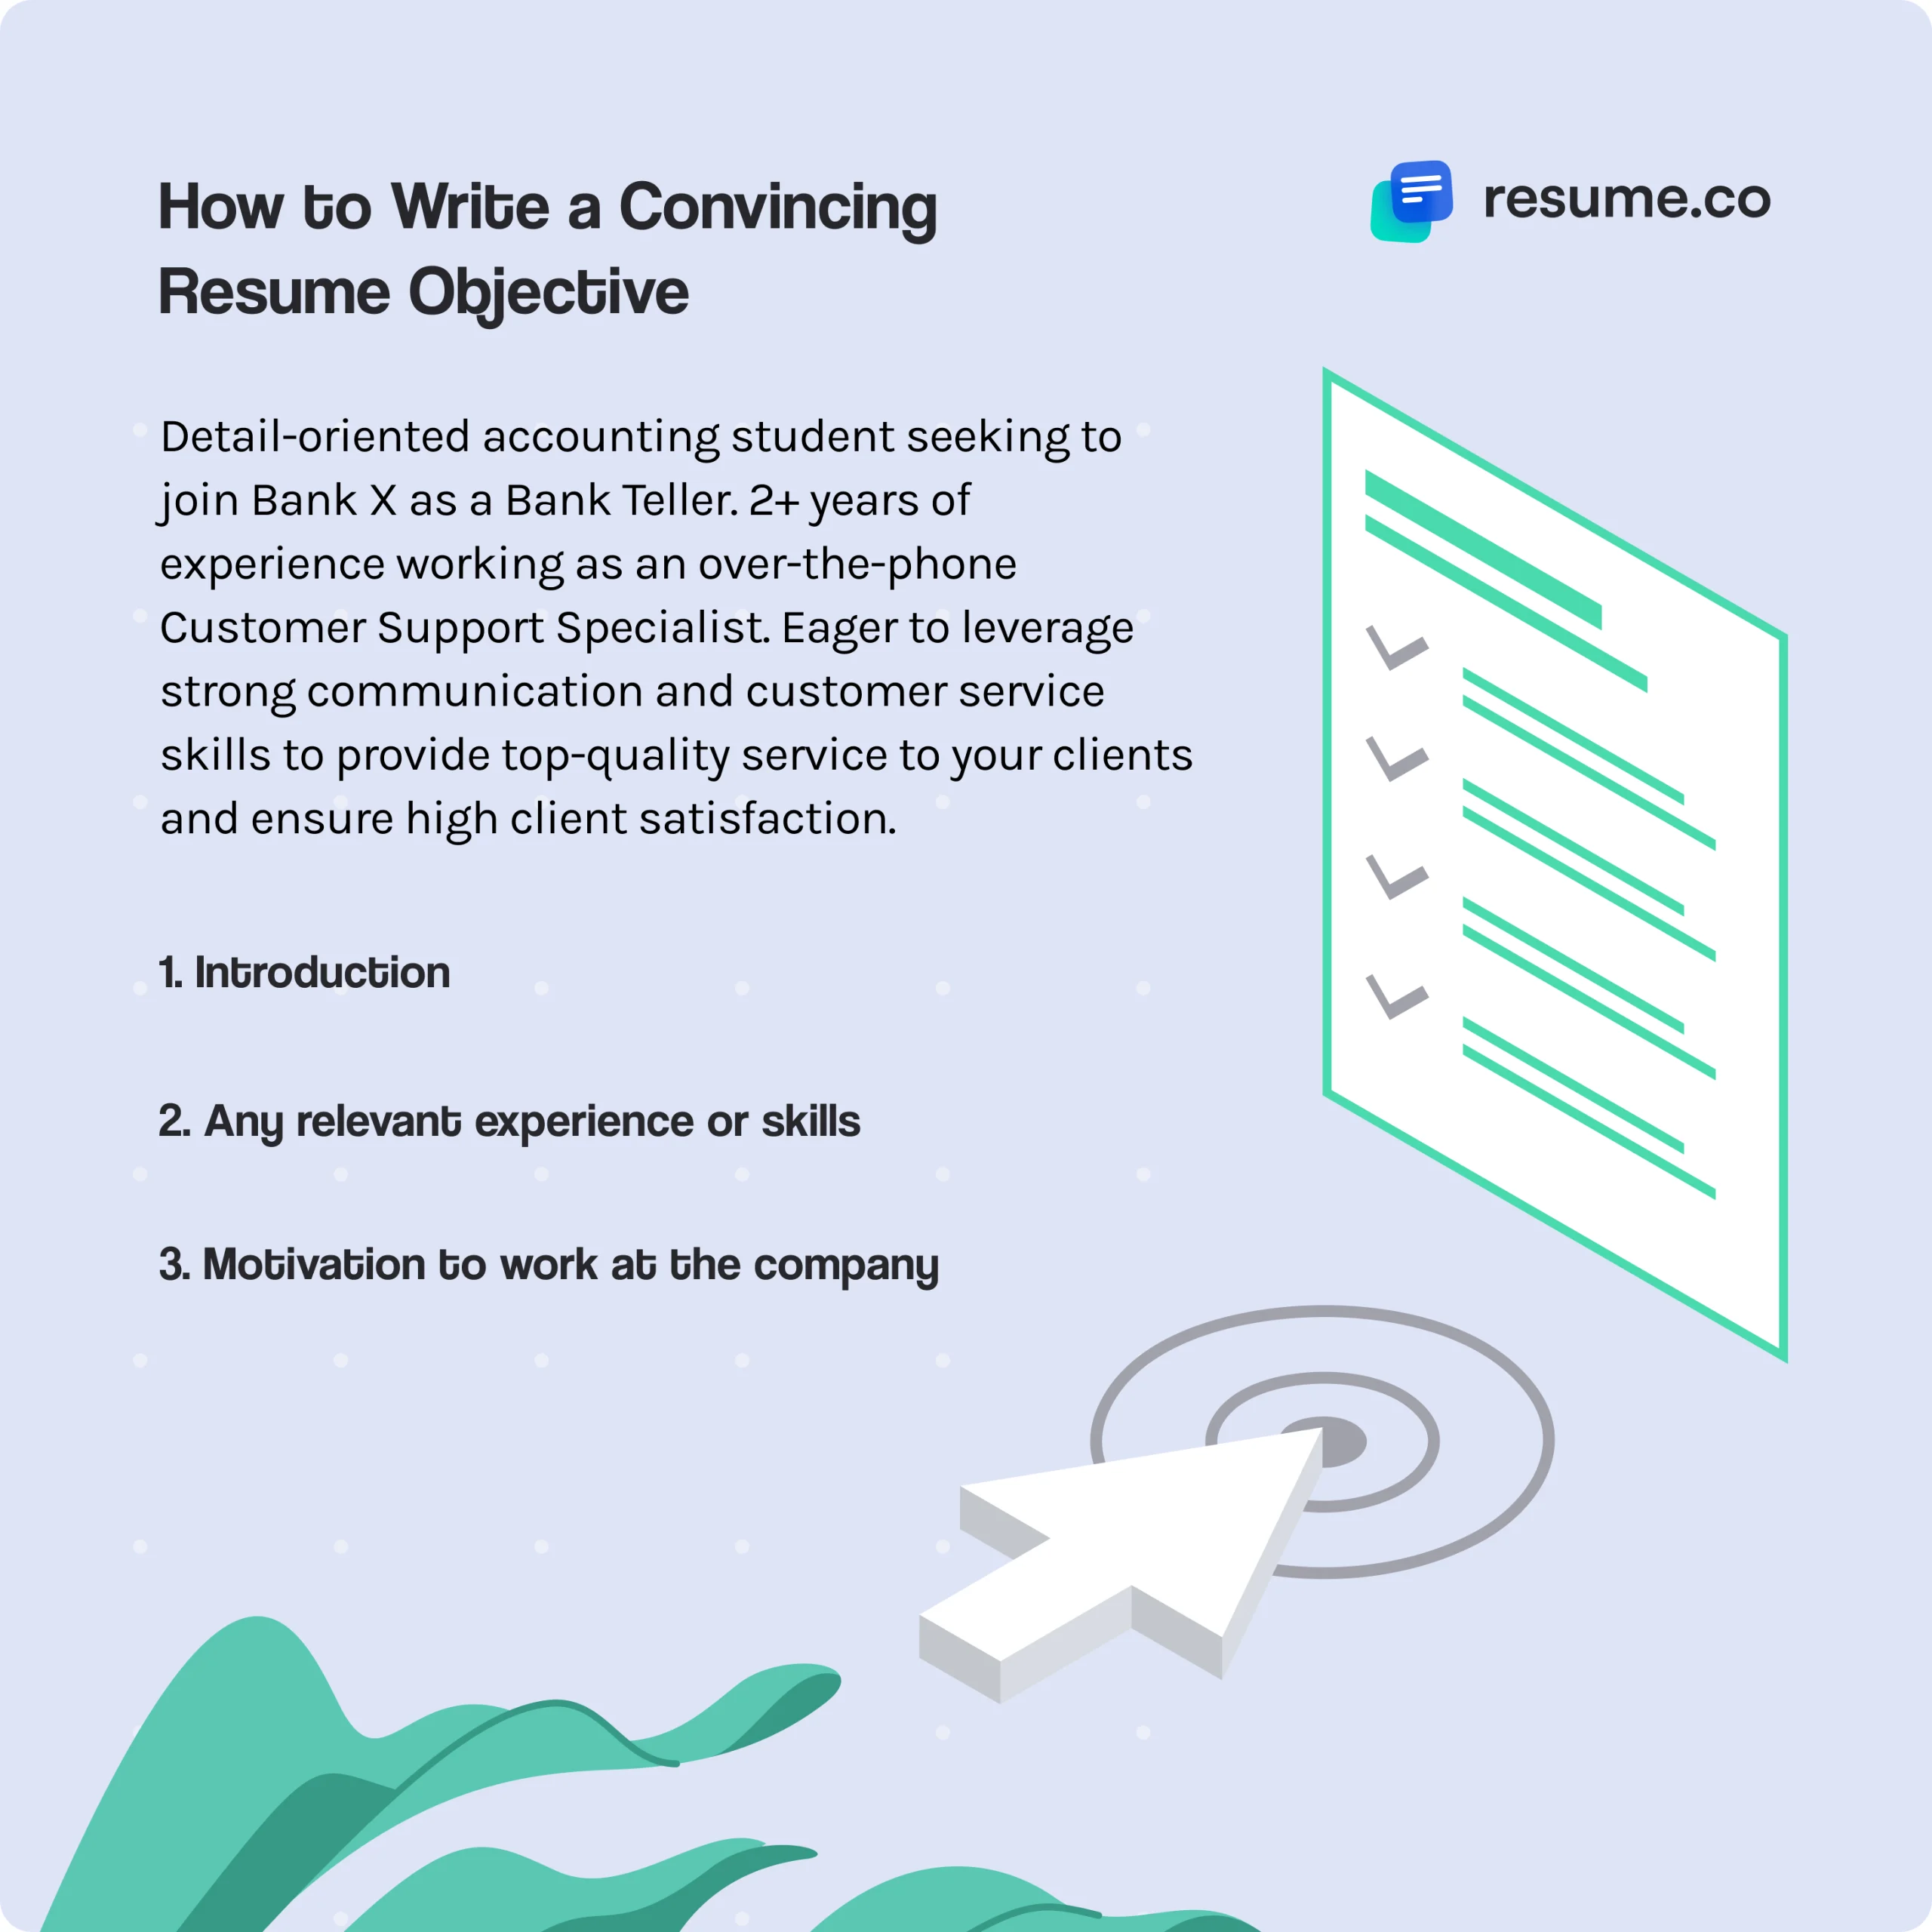 How to Write a Convincing Resume Objective